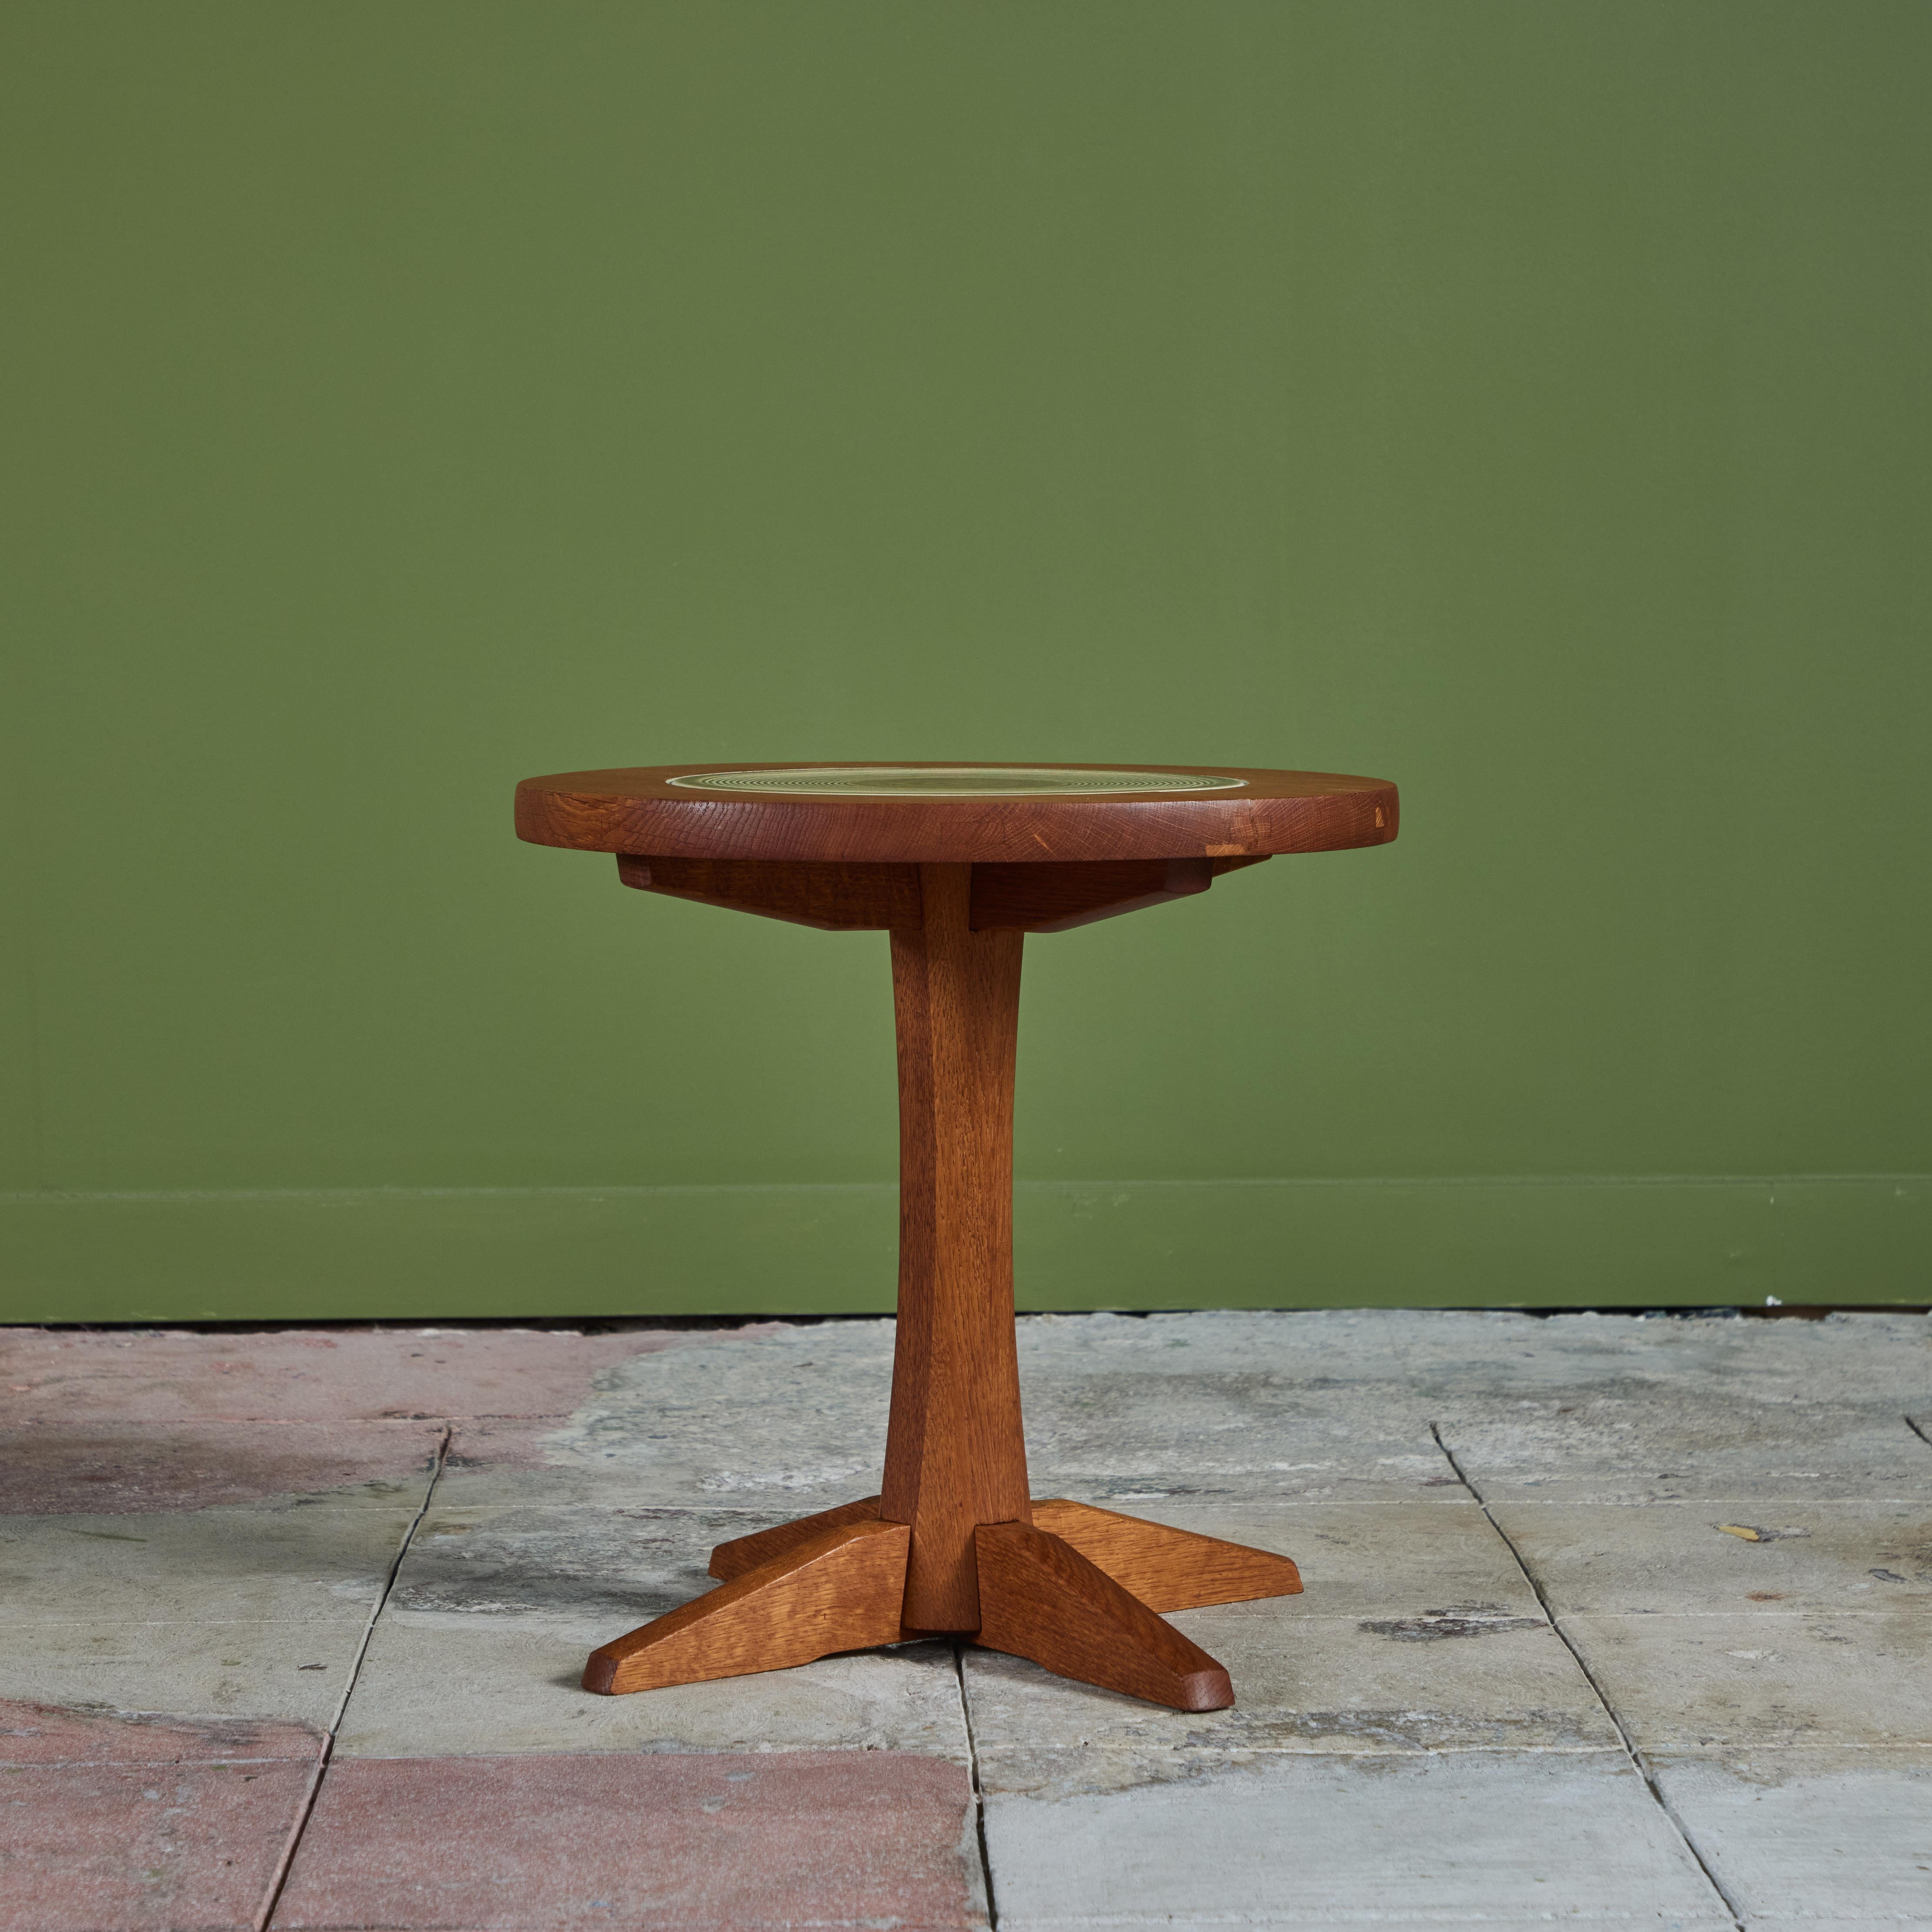 Danish Jens H. Quistgaard Oak Side Table with Tile Inlay